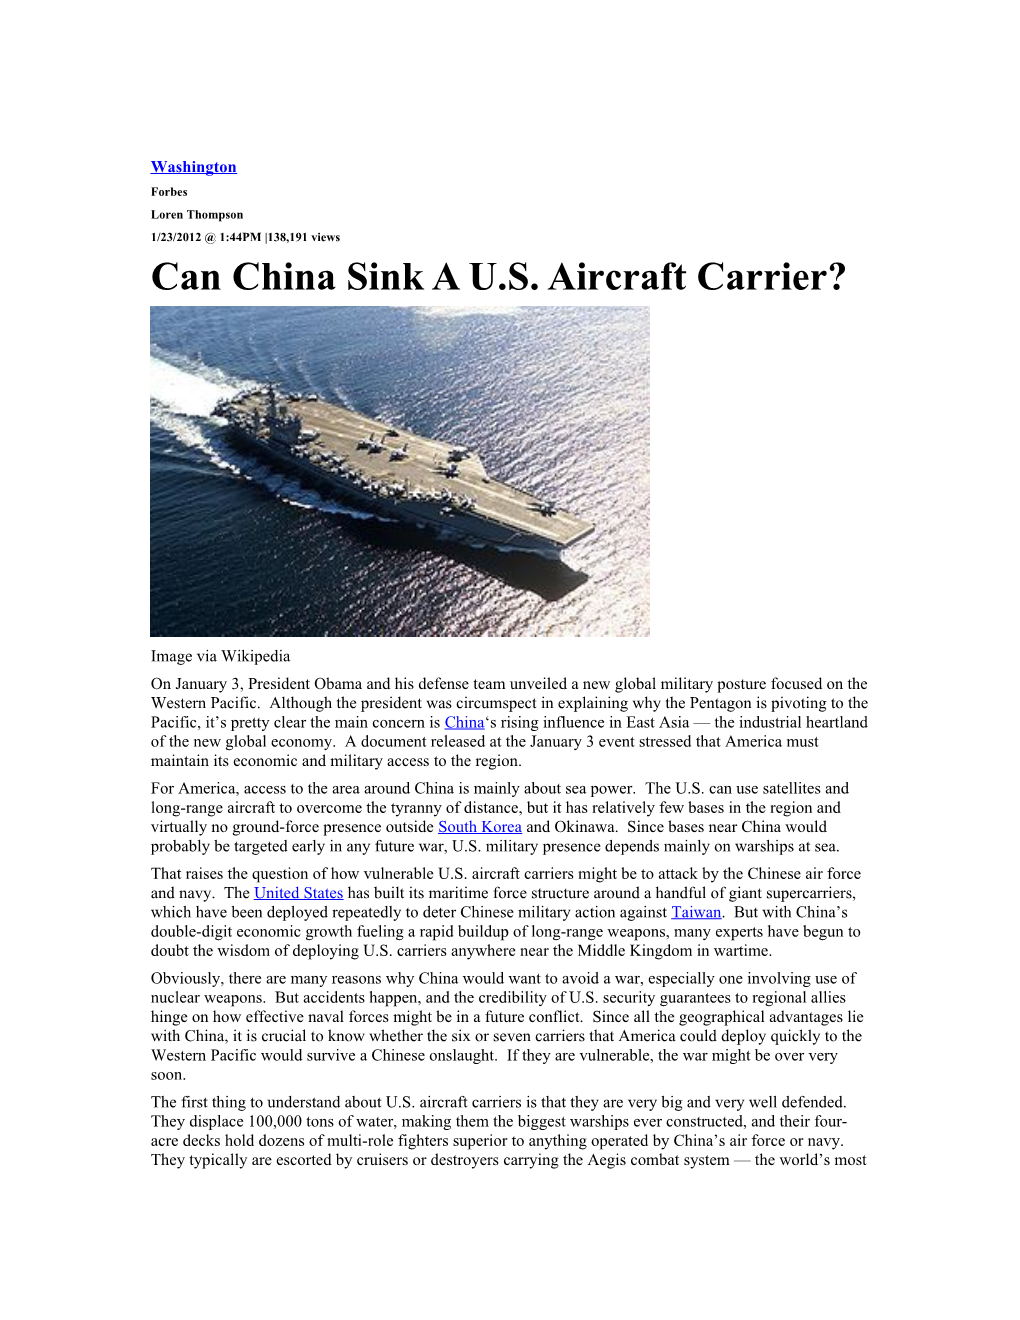 Can China Sink a U.S. Aircraft Carrier?